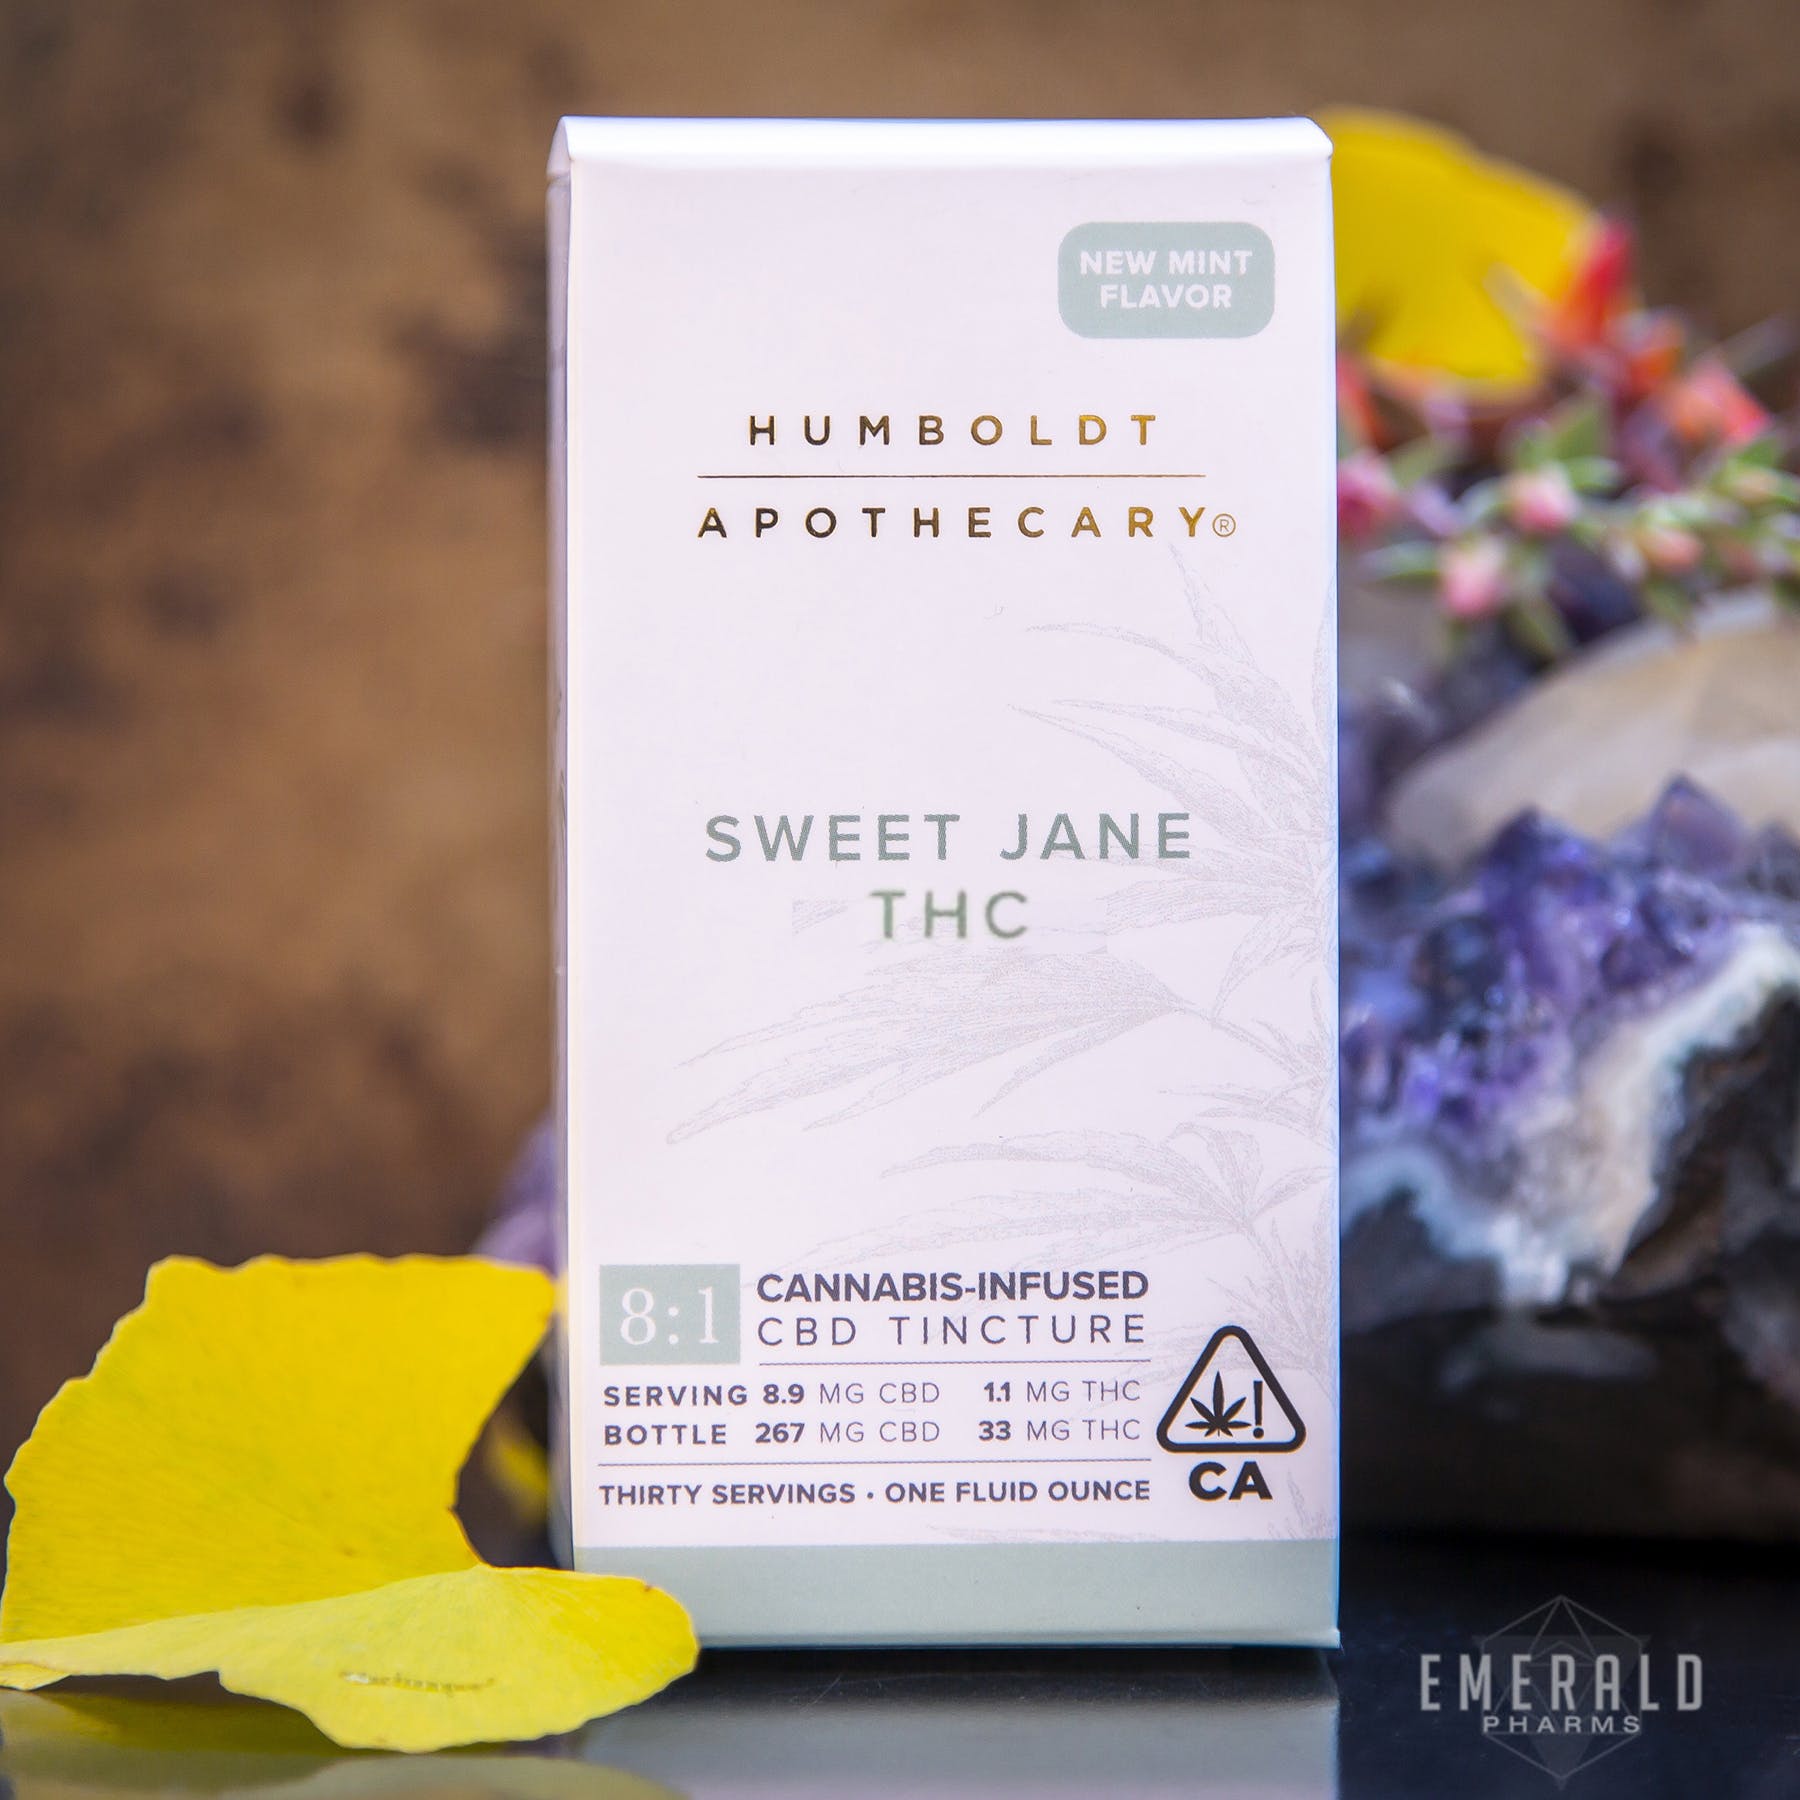 Sweet Jane THC 1/2 oz by Humboldt Apothecary